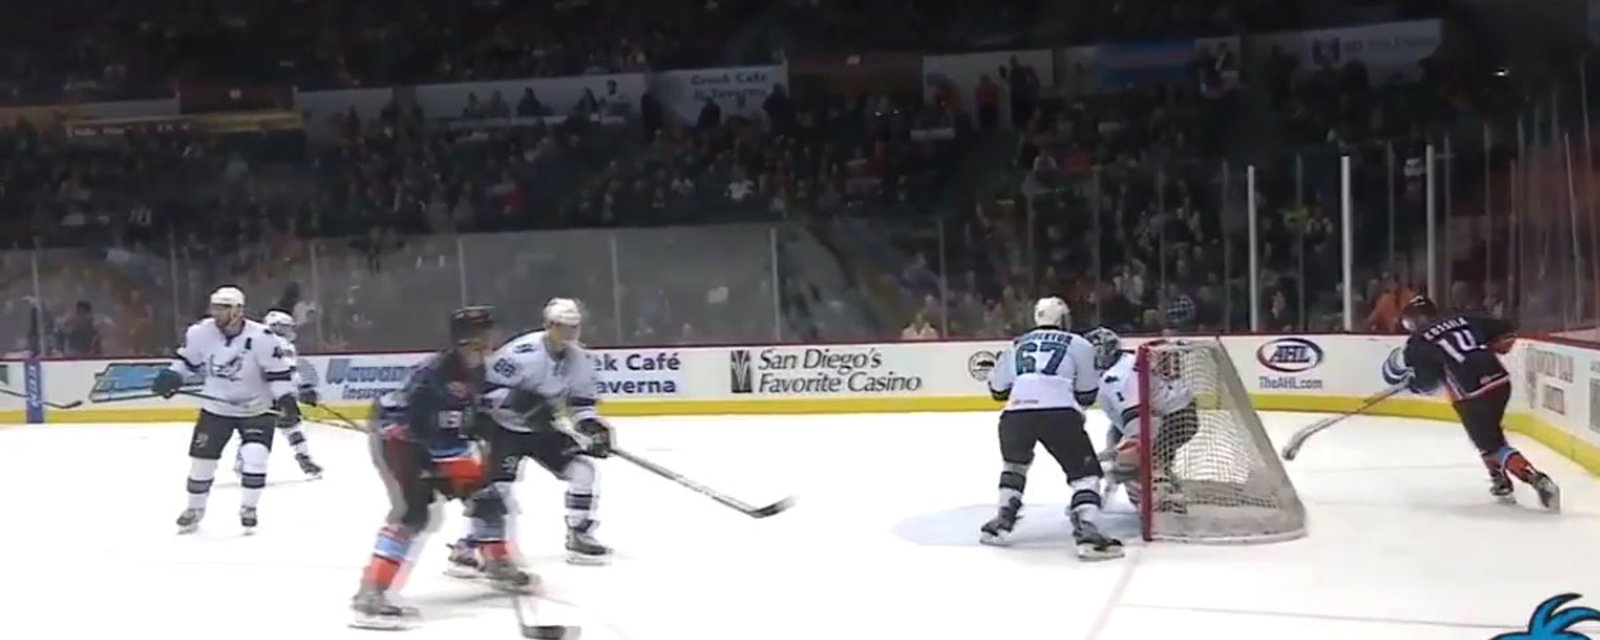 Must See: Ridiculous goal-of-the-year candidate in the AHL.